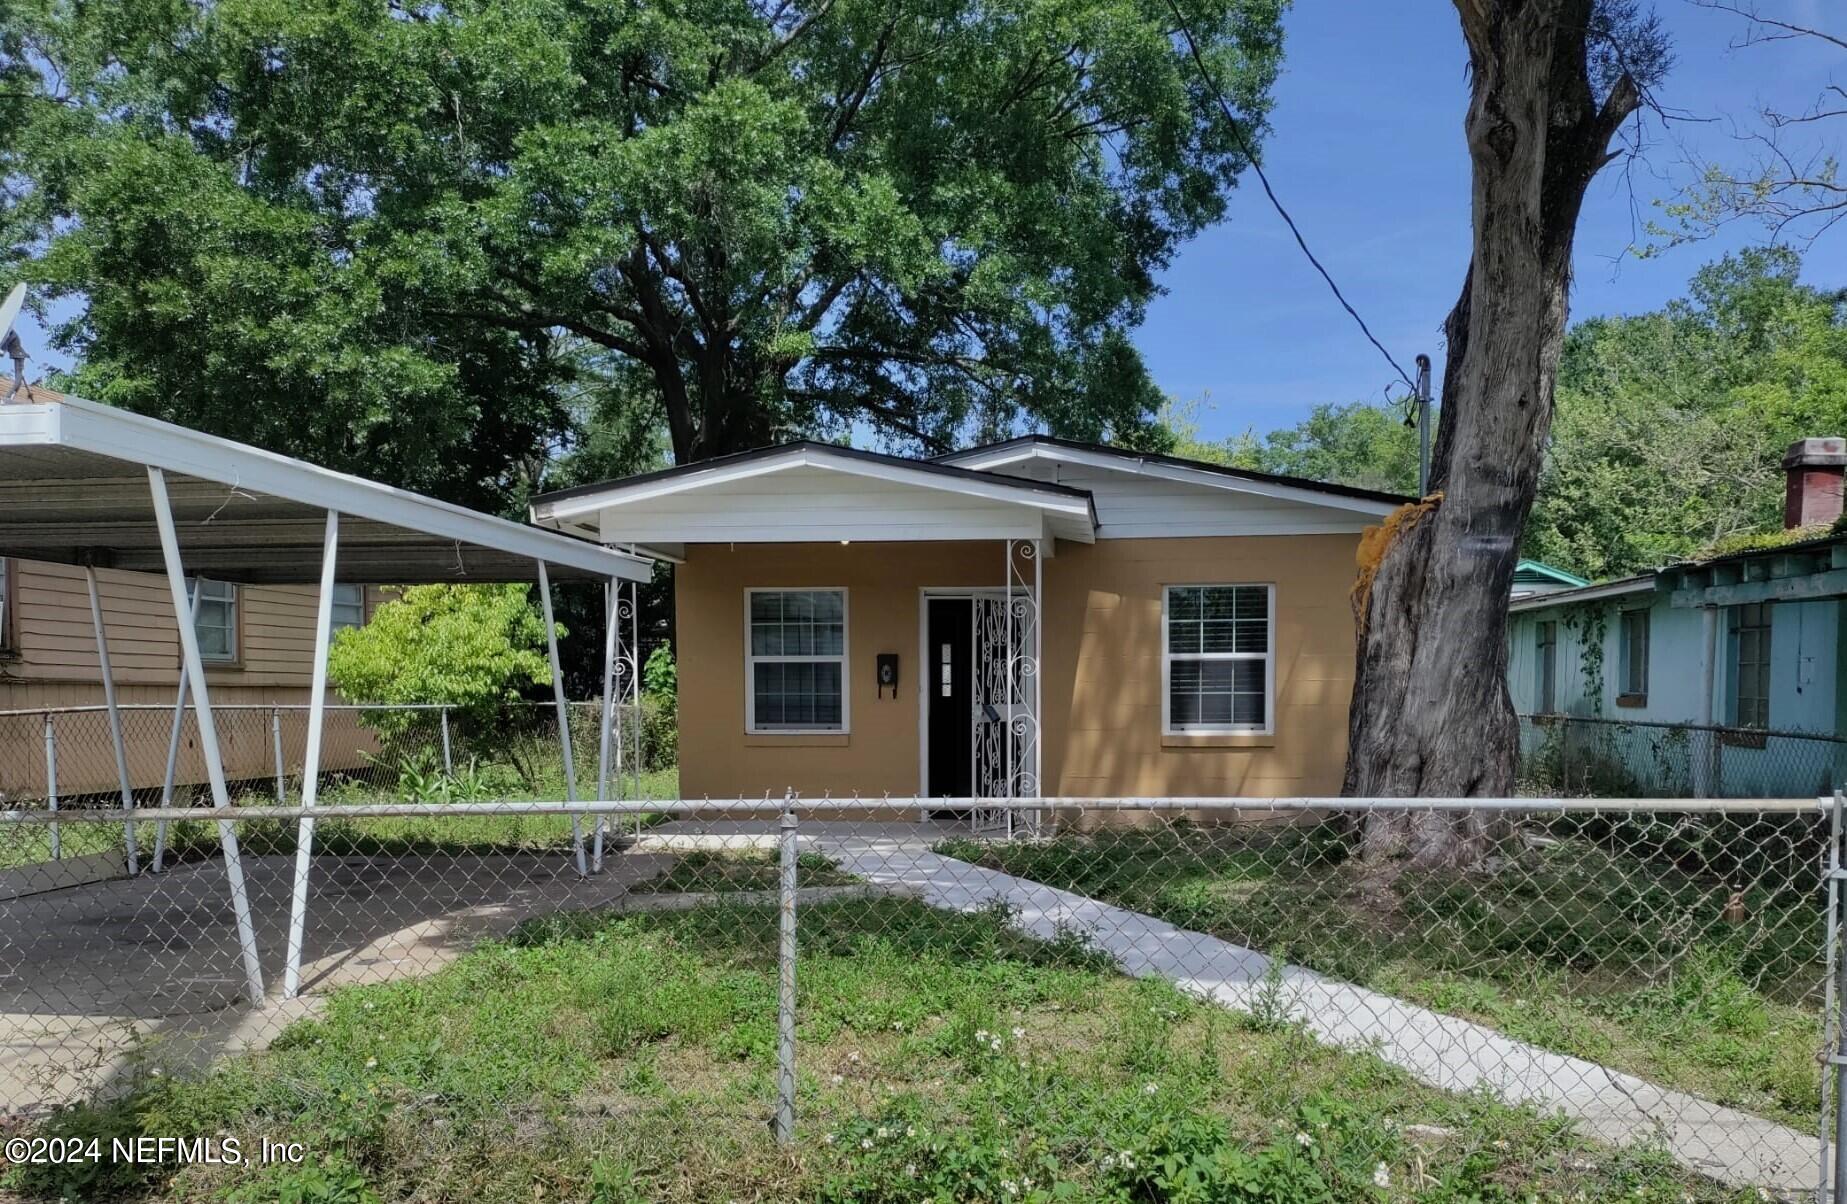 Jacksonville, FL home for sale located at 1331 W 21st Street, Jacksonville, FL 32209